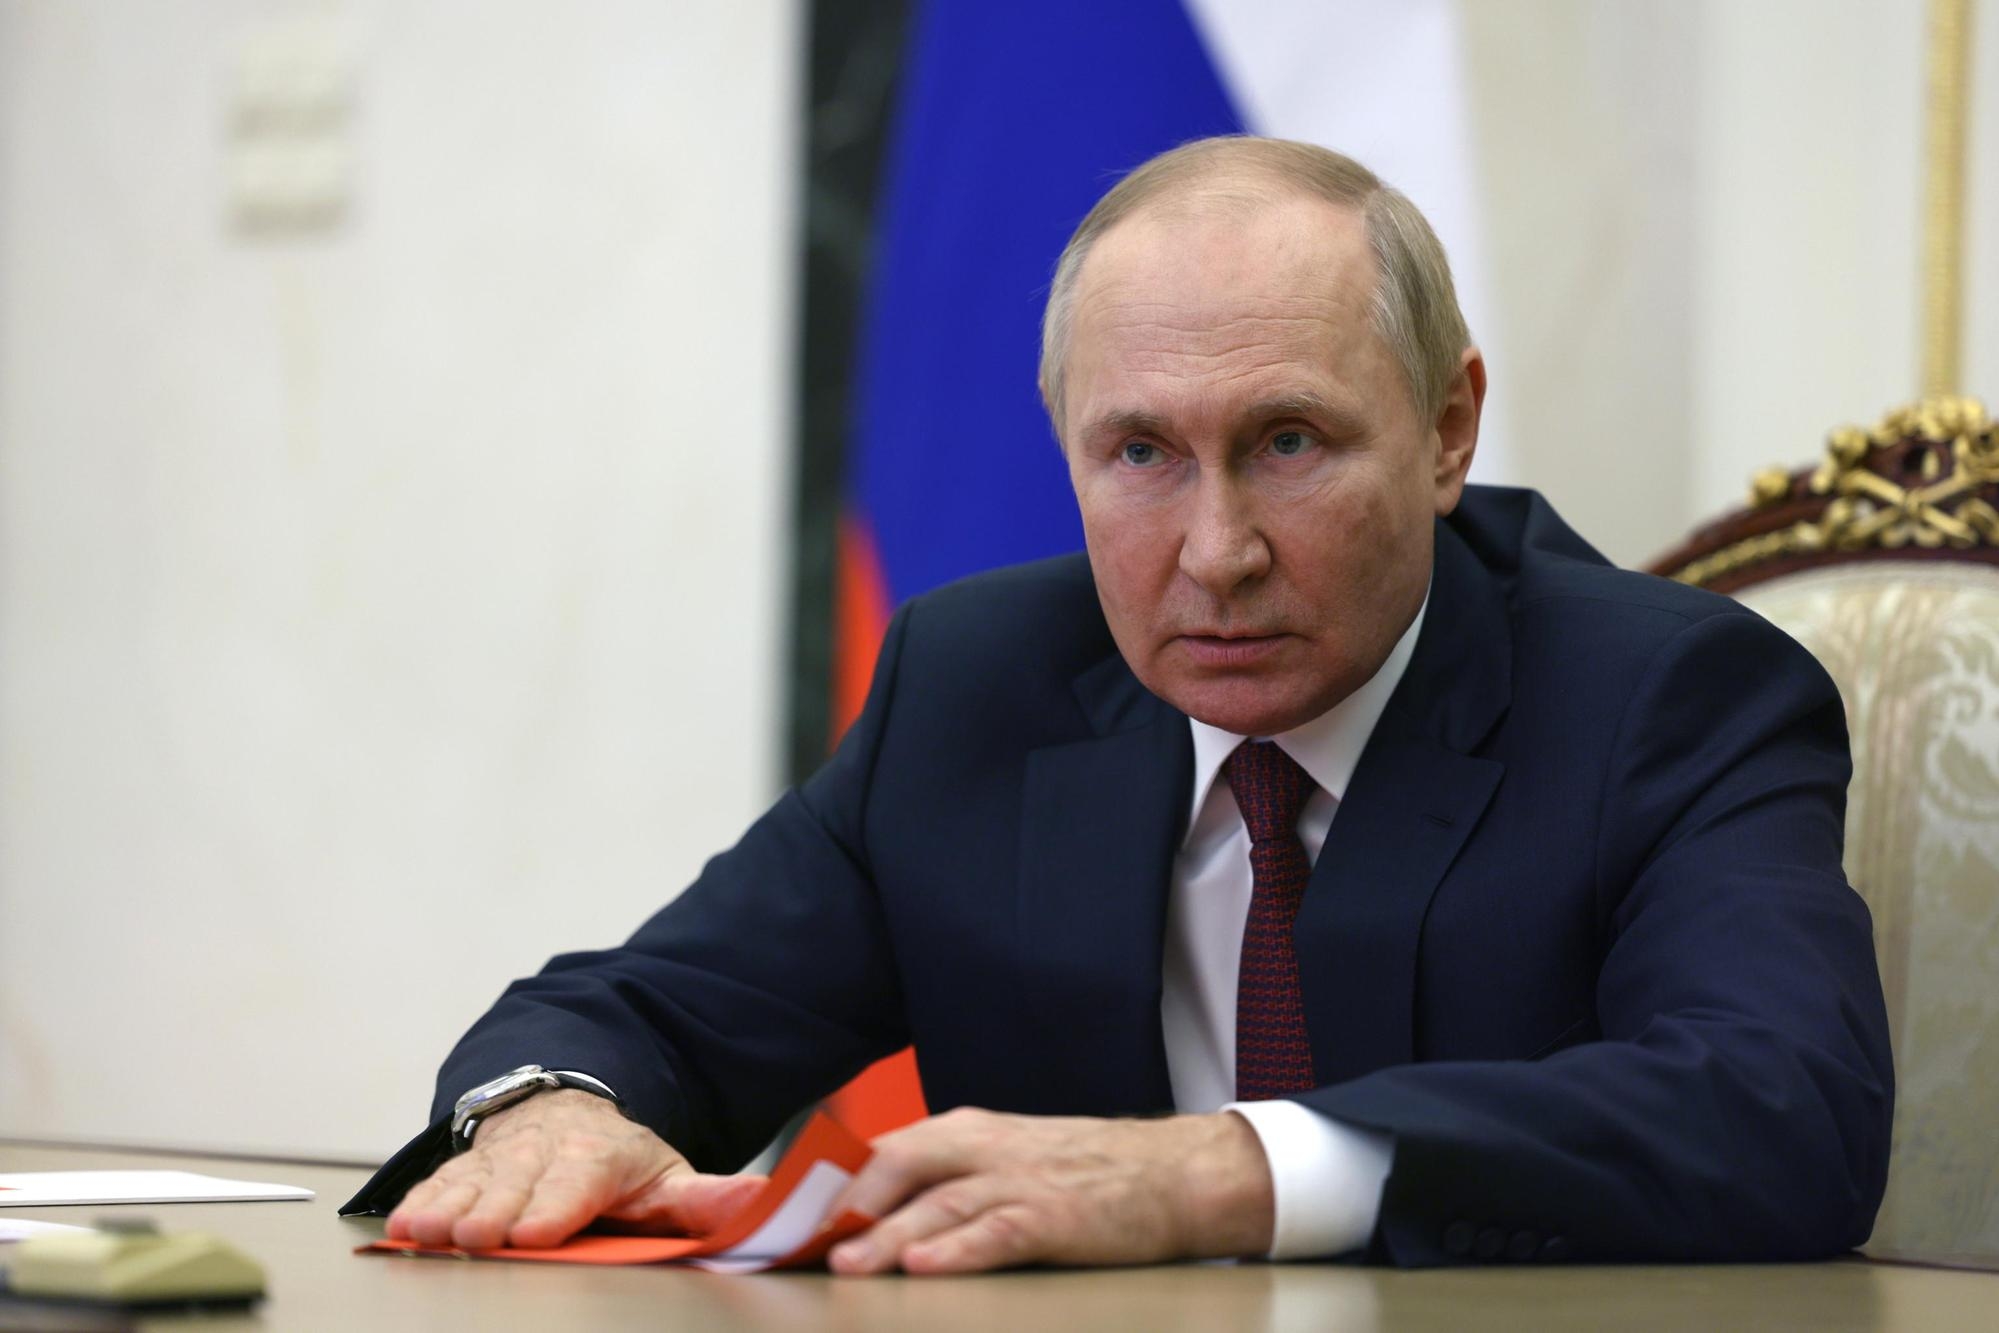 Russian President Vladimir Putin chairs a meeting with the members for Russian security Council via a video conference at the Kremlin in Moscow, Russia, 29 September 2022. ANSA/GAVRIIL GRIGOROV/SPUTNIK/KREMLIN / POOL MANDATORY CREDIT